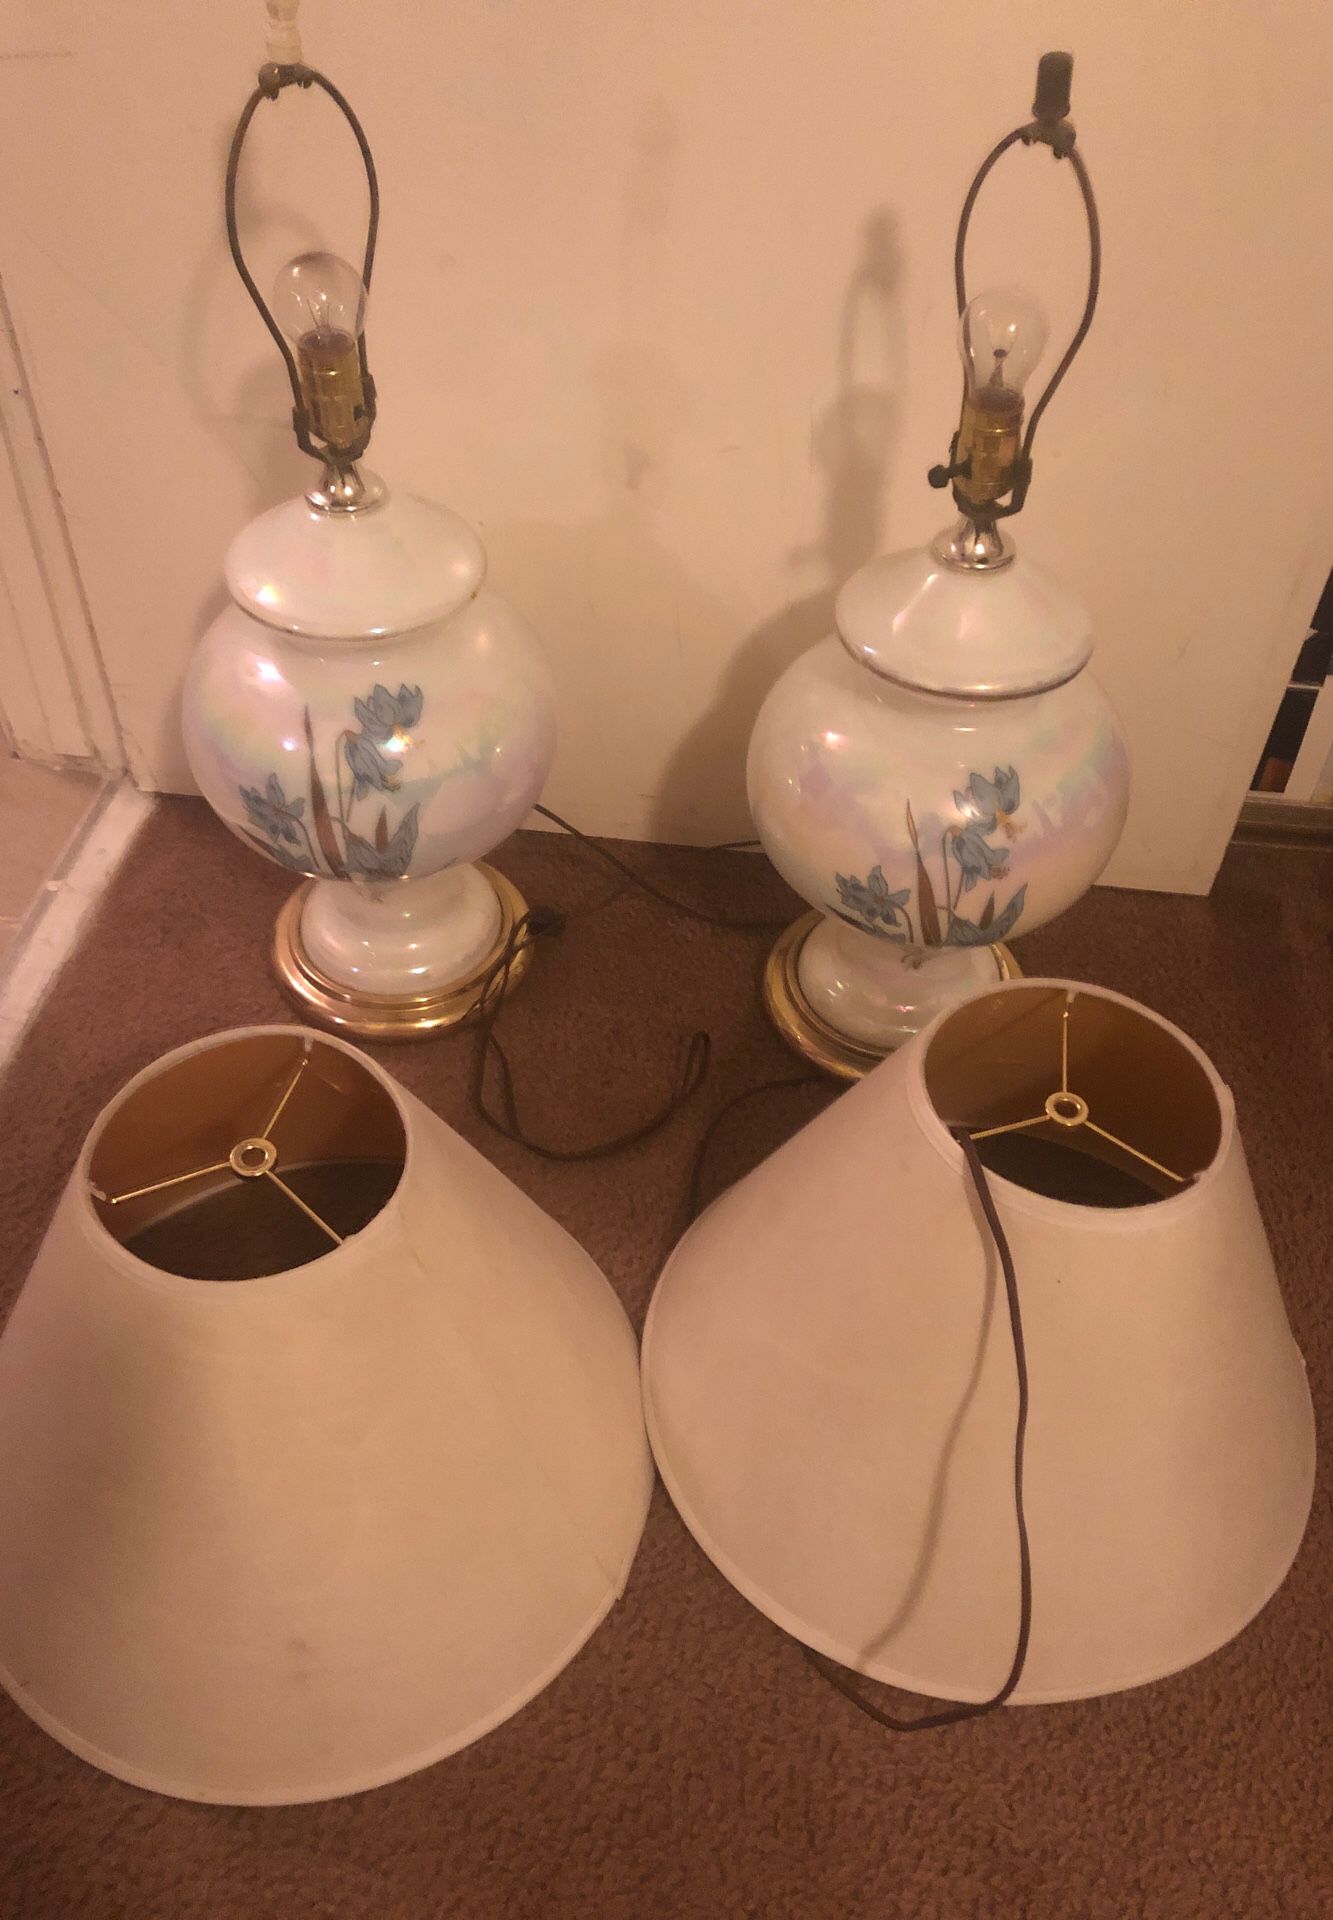 Two lamps for $20